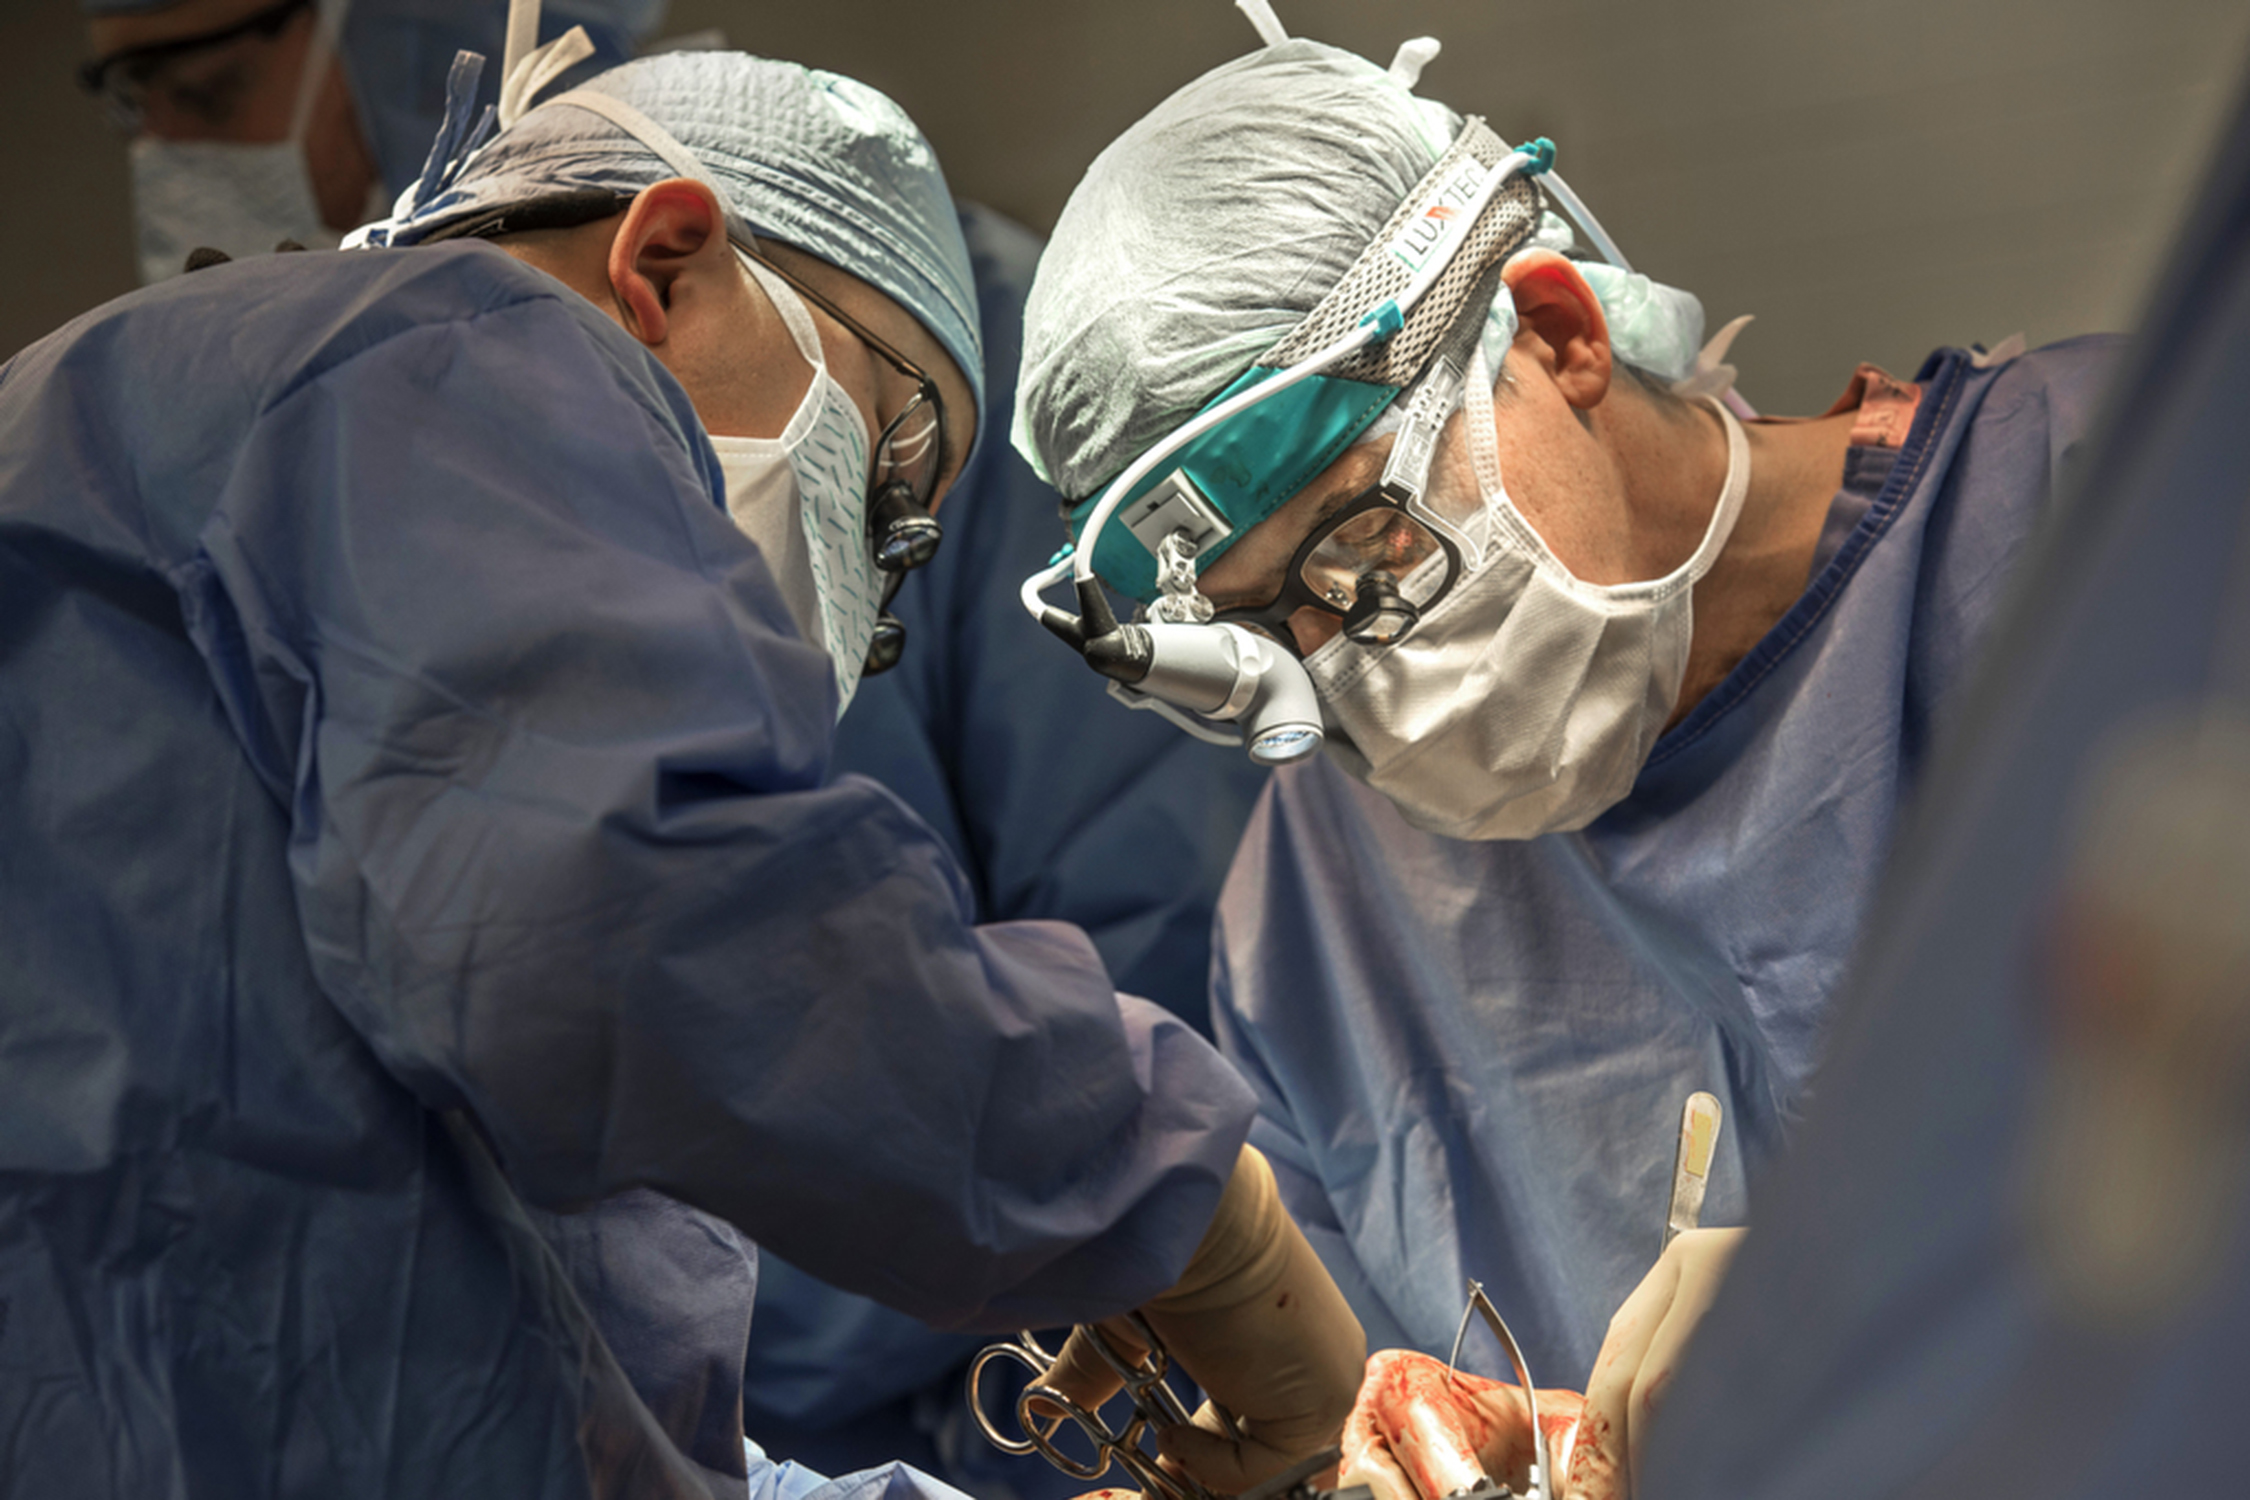 Two healthcare providers performing surgery